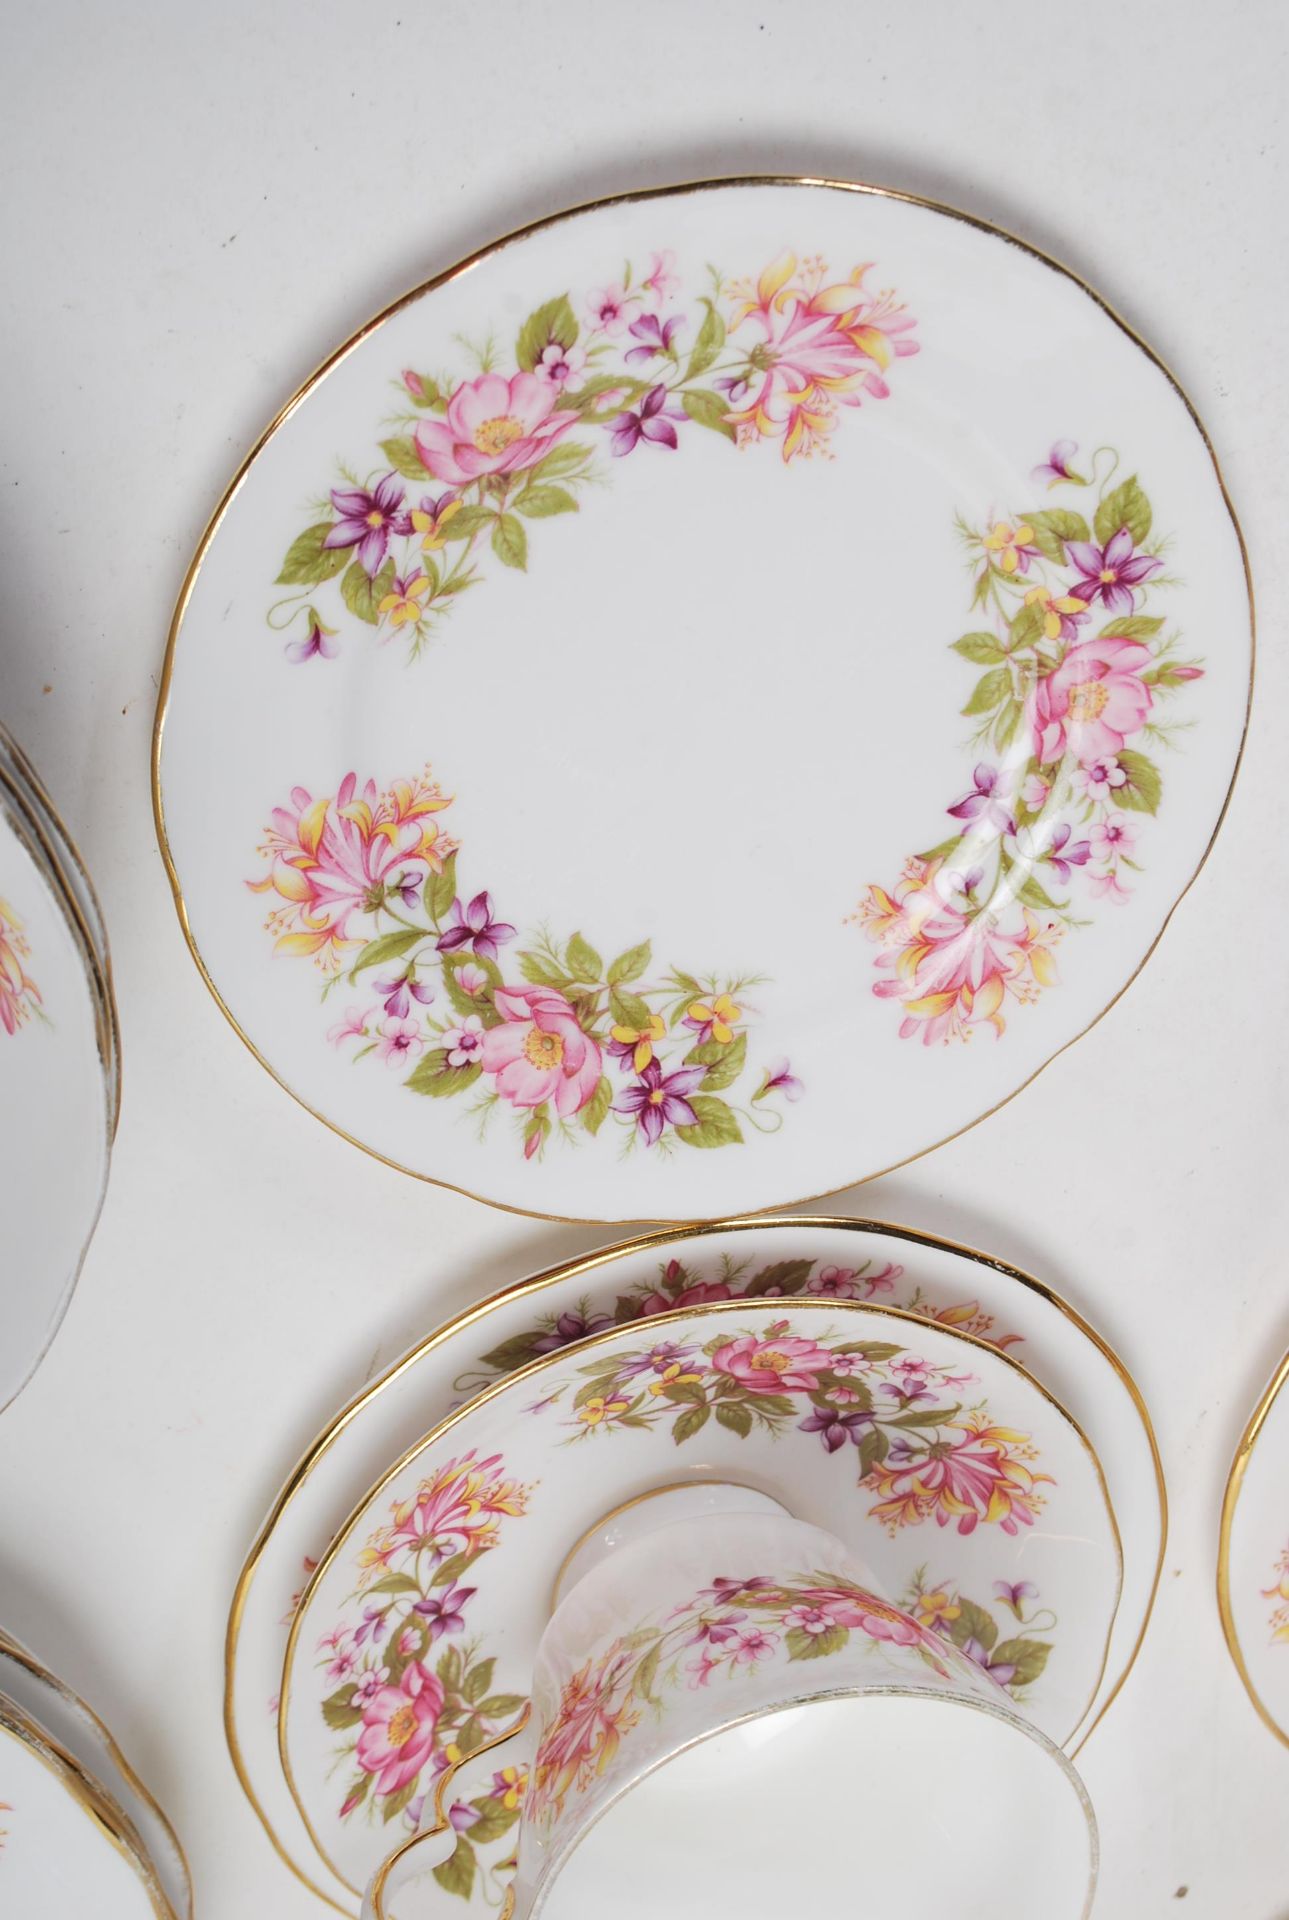 COLCLOUGH WAYSIDE PATTERN DINNER SERVICE - Image 11 of 12